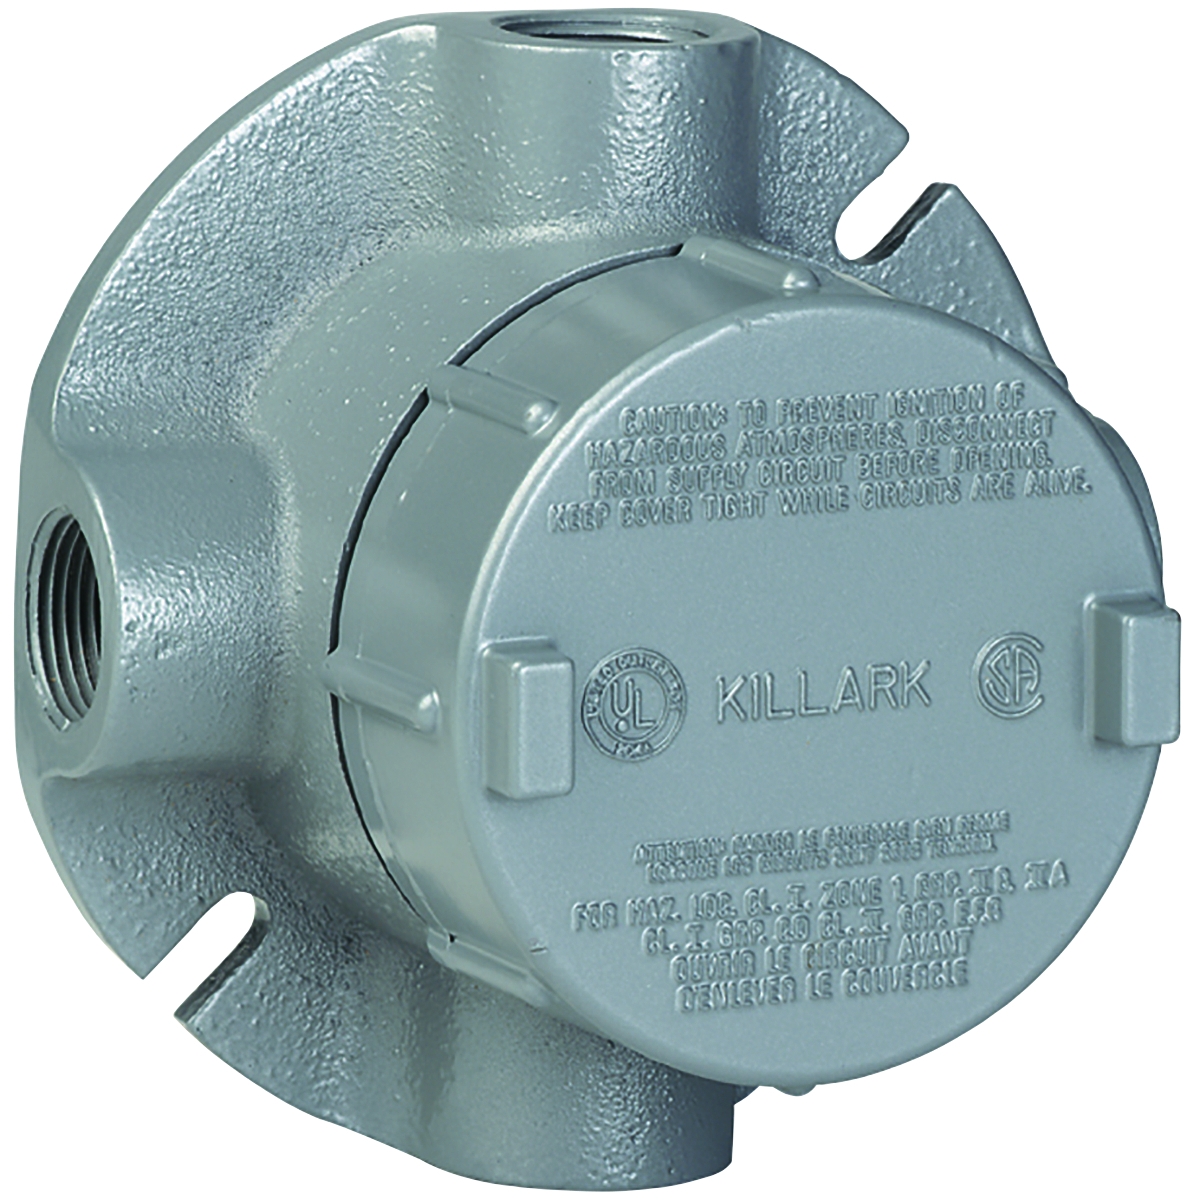 GEC SERIES FITTINGS - IRON - OUTLET BODIES WITH MOUNTING FLANGE - XTFTYPE OUTLET BODY - HUB SIZE 1 IN - VOLUME 19.0 CU IN